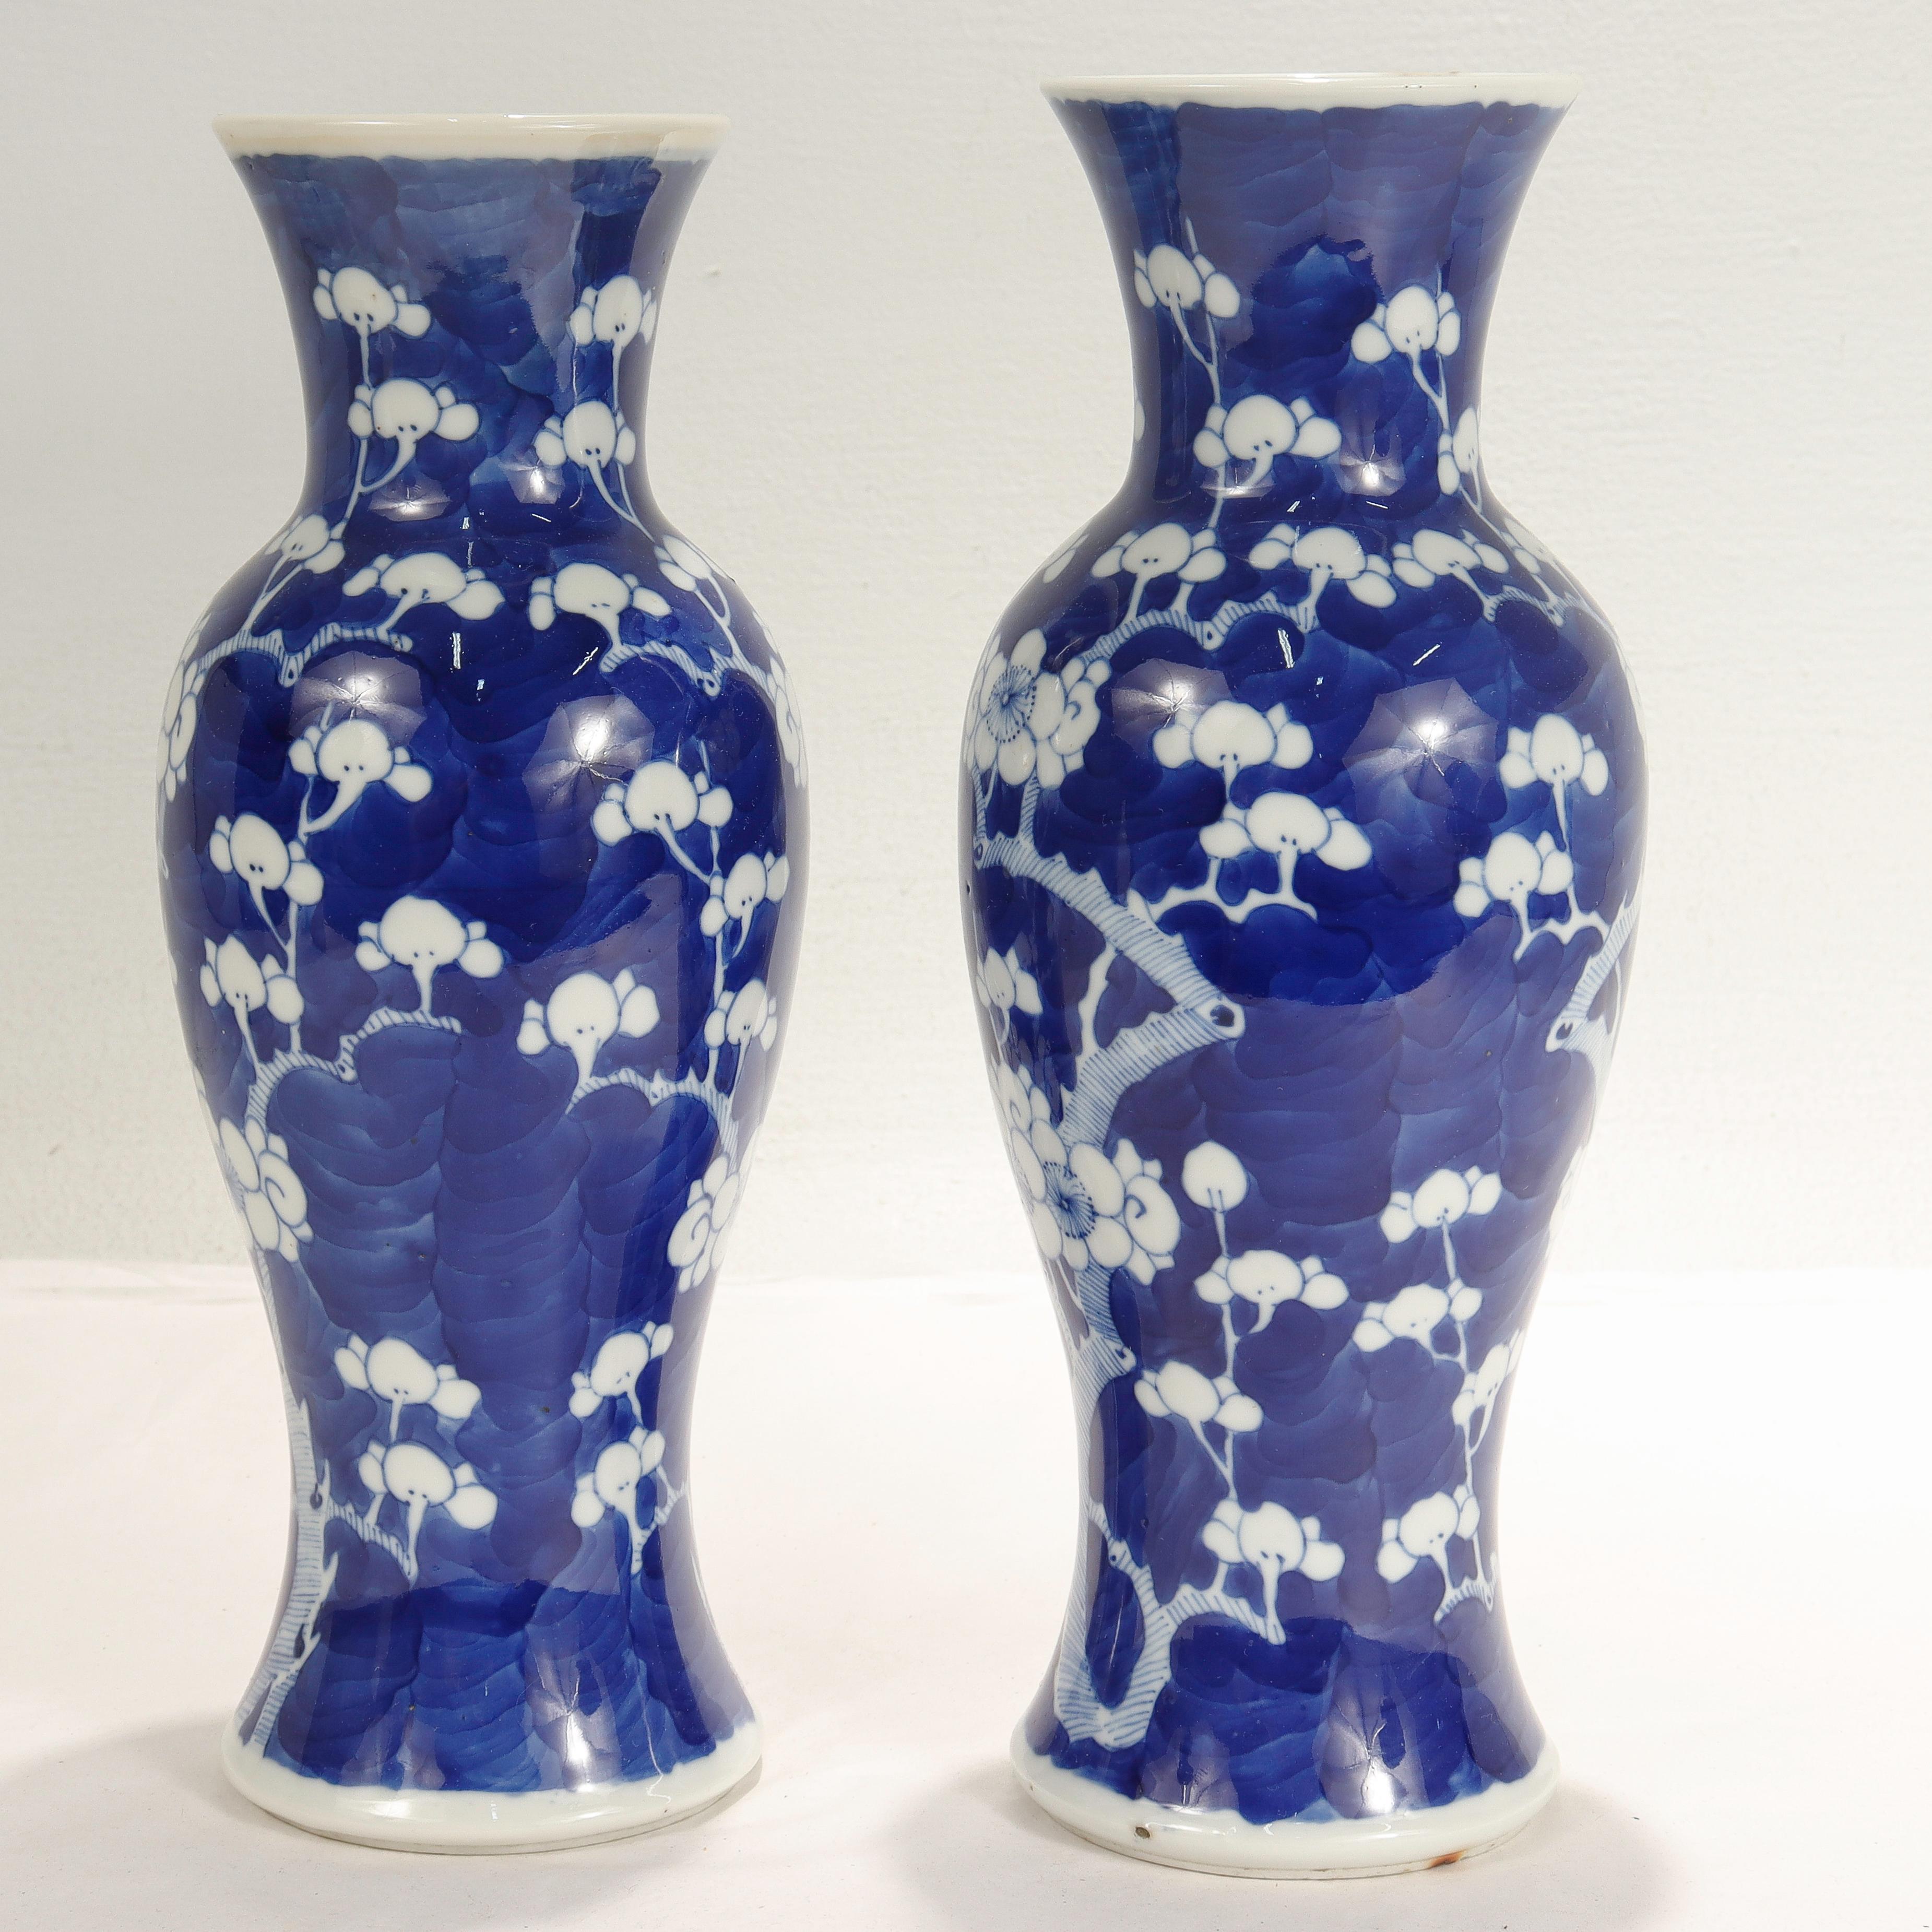 20th Century Pair of Old or Antique Chinese Baluster Form Prunus or Hawthorne Pattern Vases